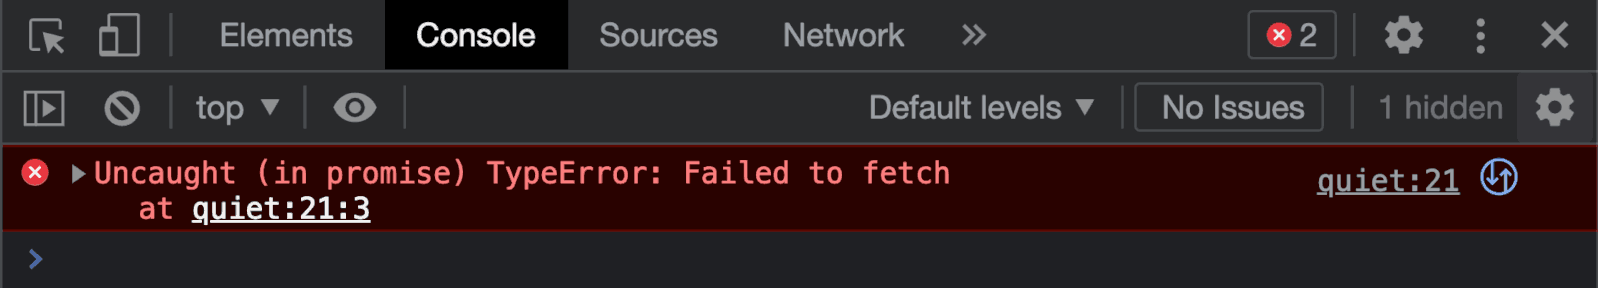 In the console: Uncaught (in promise) TypeError: Failed to fetch